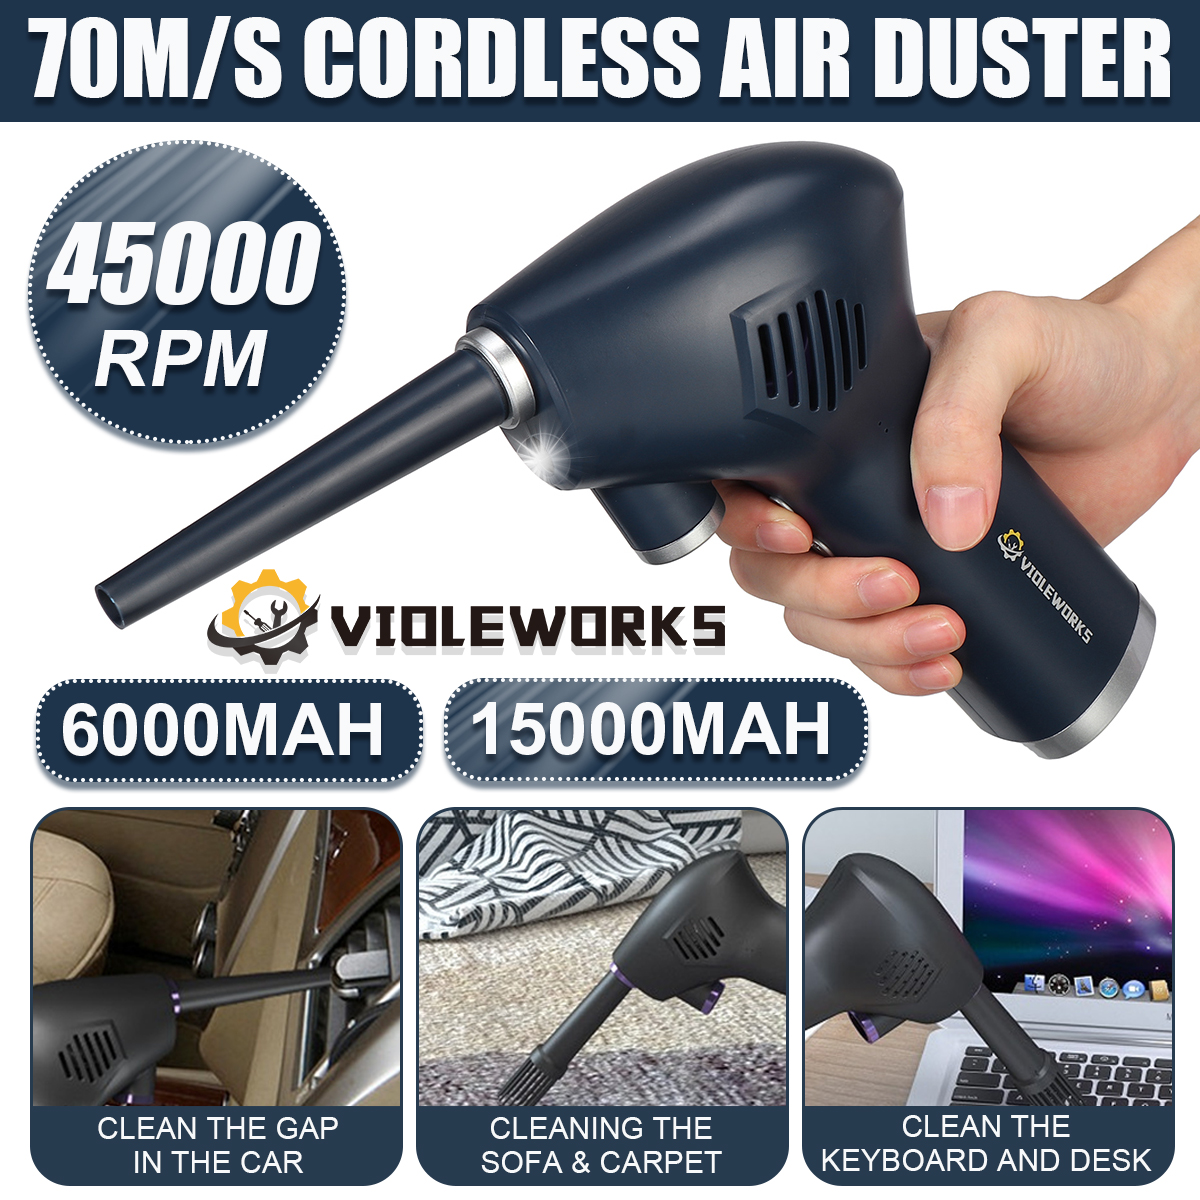 VIOLEWORKS-45000RPM-Cordless-Air-Duster-Air-Blower-High-Pressure-Cleaner-for-Computer-Car-Cleaning-T-1851018-1